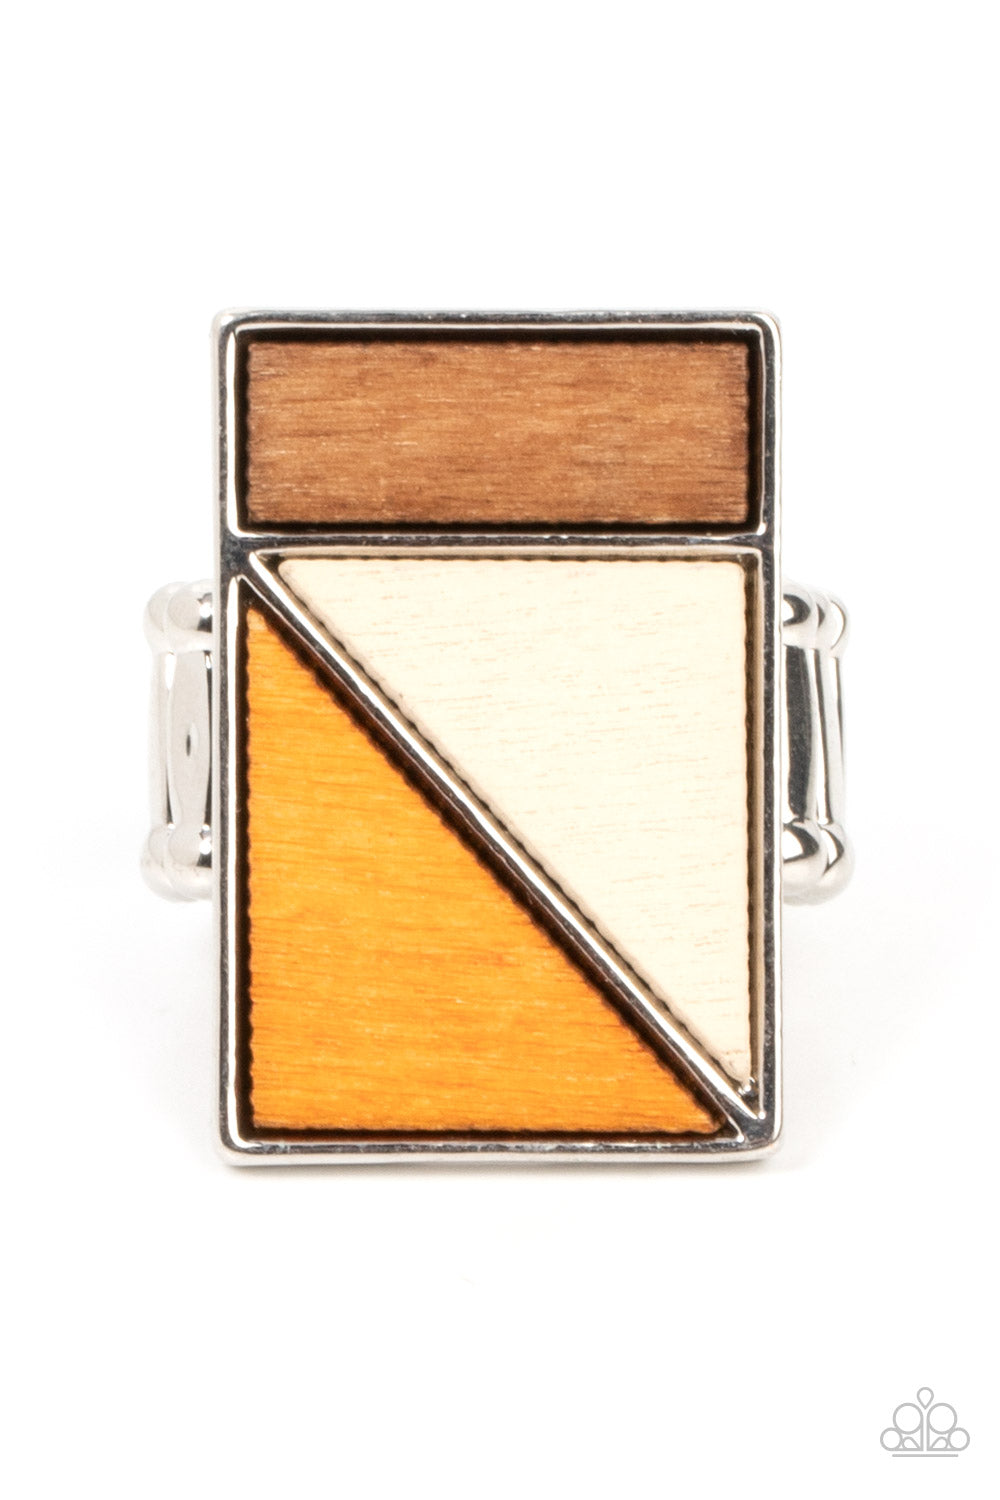 Paparazzi - Happily EVERGREEN After - Orange - Featuring natural white, orange, and brown finishes, triangular and rectangular wooden frames stack into a geometrically appealing centerpiece atop the finger.